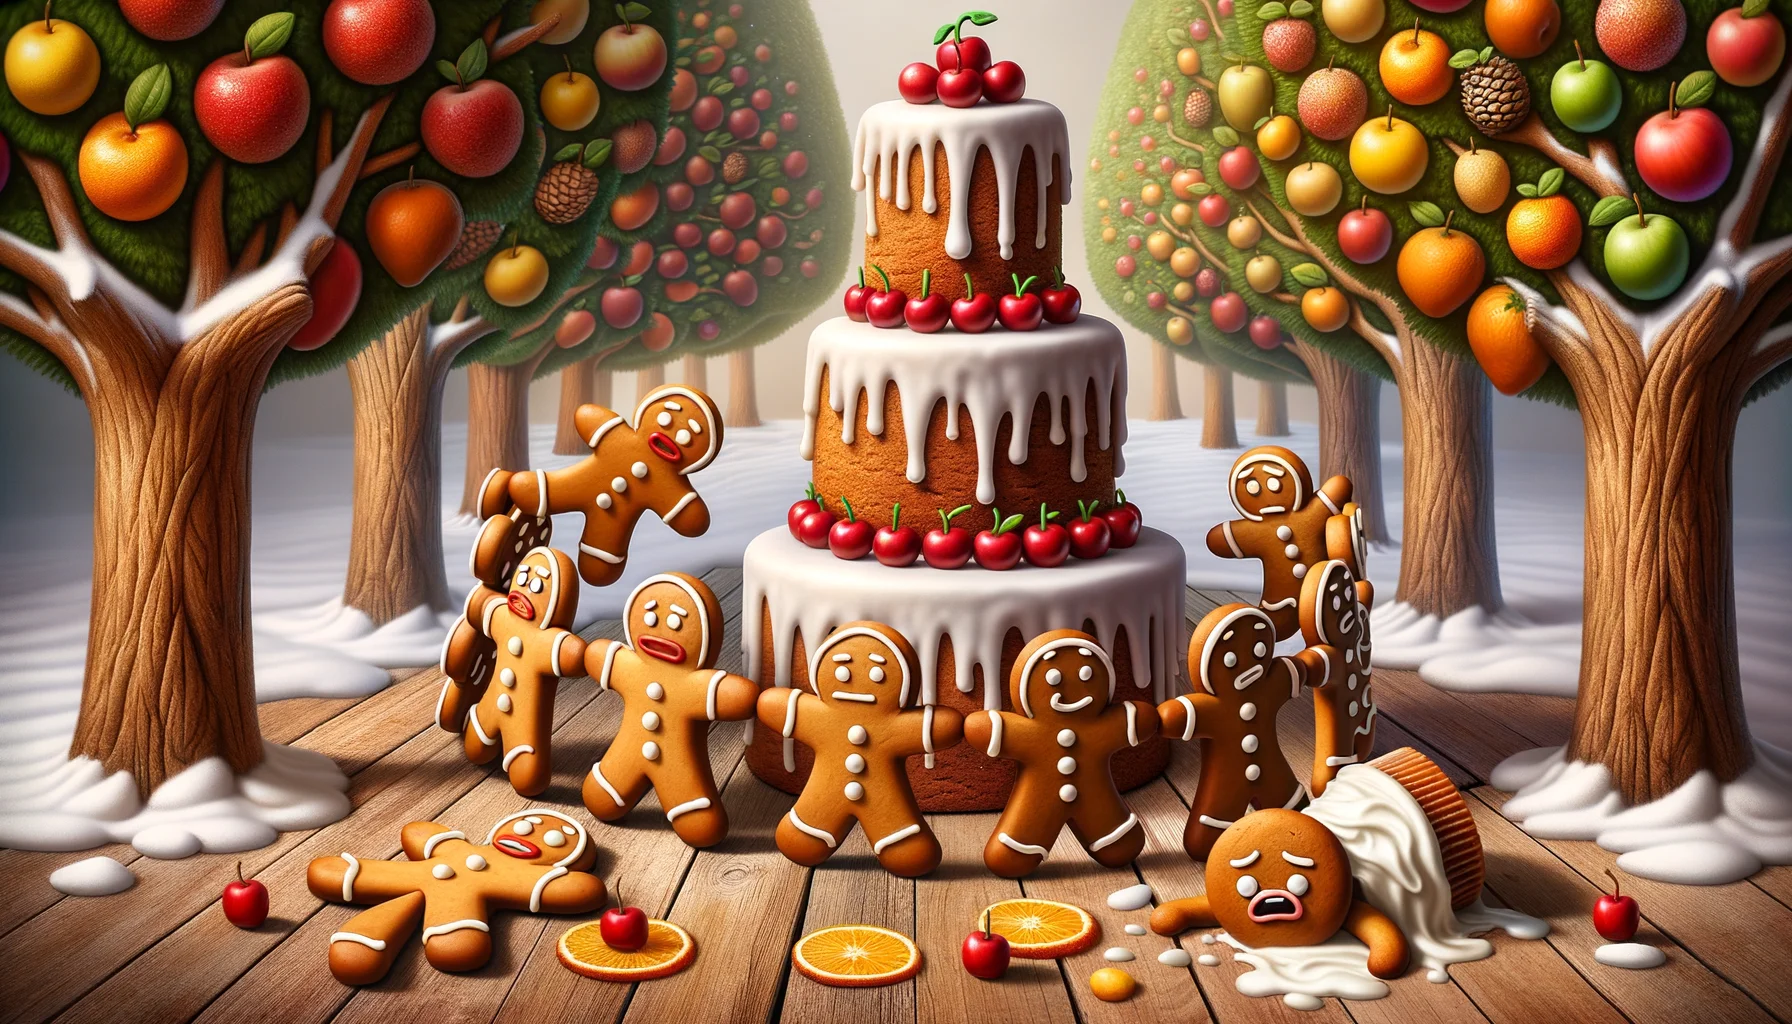 An amusing and realistic scene of dynamic seasonal delicacies being at the center stage. At the center, gingerbread cookies are decorating a tree, each hand in hand, forming a convivial chain. One appears to be slipping, causing an exaggerated domino effect, toppling the others with surprised expressions. To the side, a white frosted cake mocks the slipping cookie, icing drizzling down its sides like melting snow. The background showcases trees with leaves made of varied fruit candies to symbolize different seasons. This whimsical picture of drama within the confectionery world is filled with light-hearted humor and clear seasonal themes.